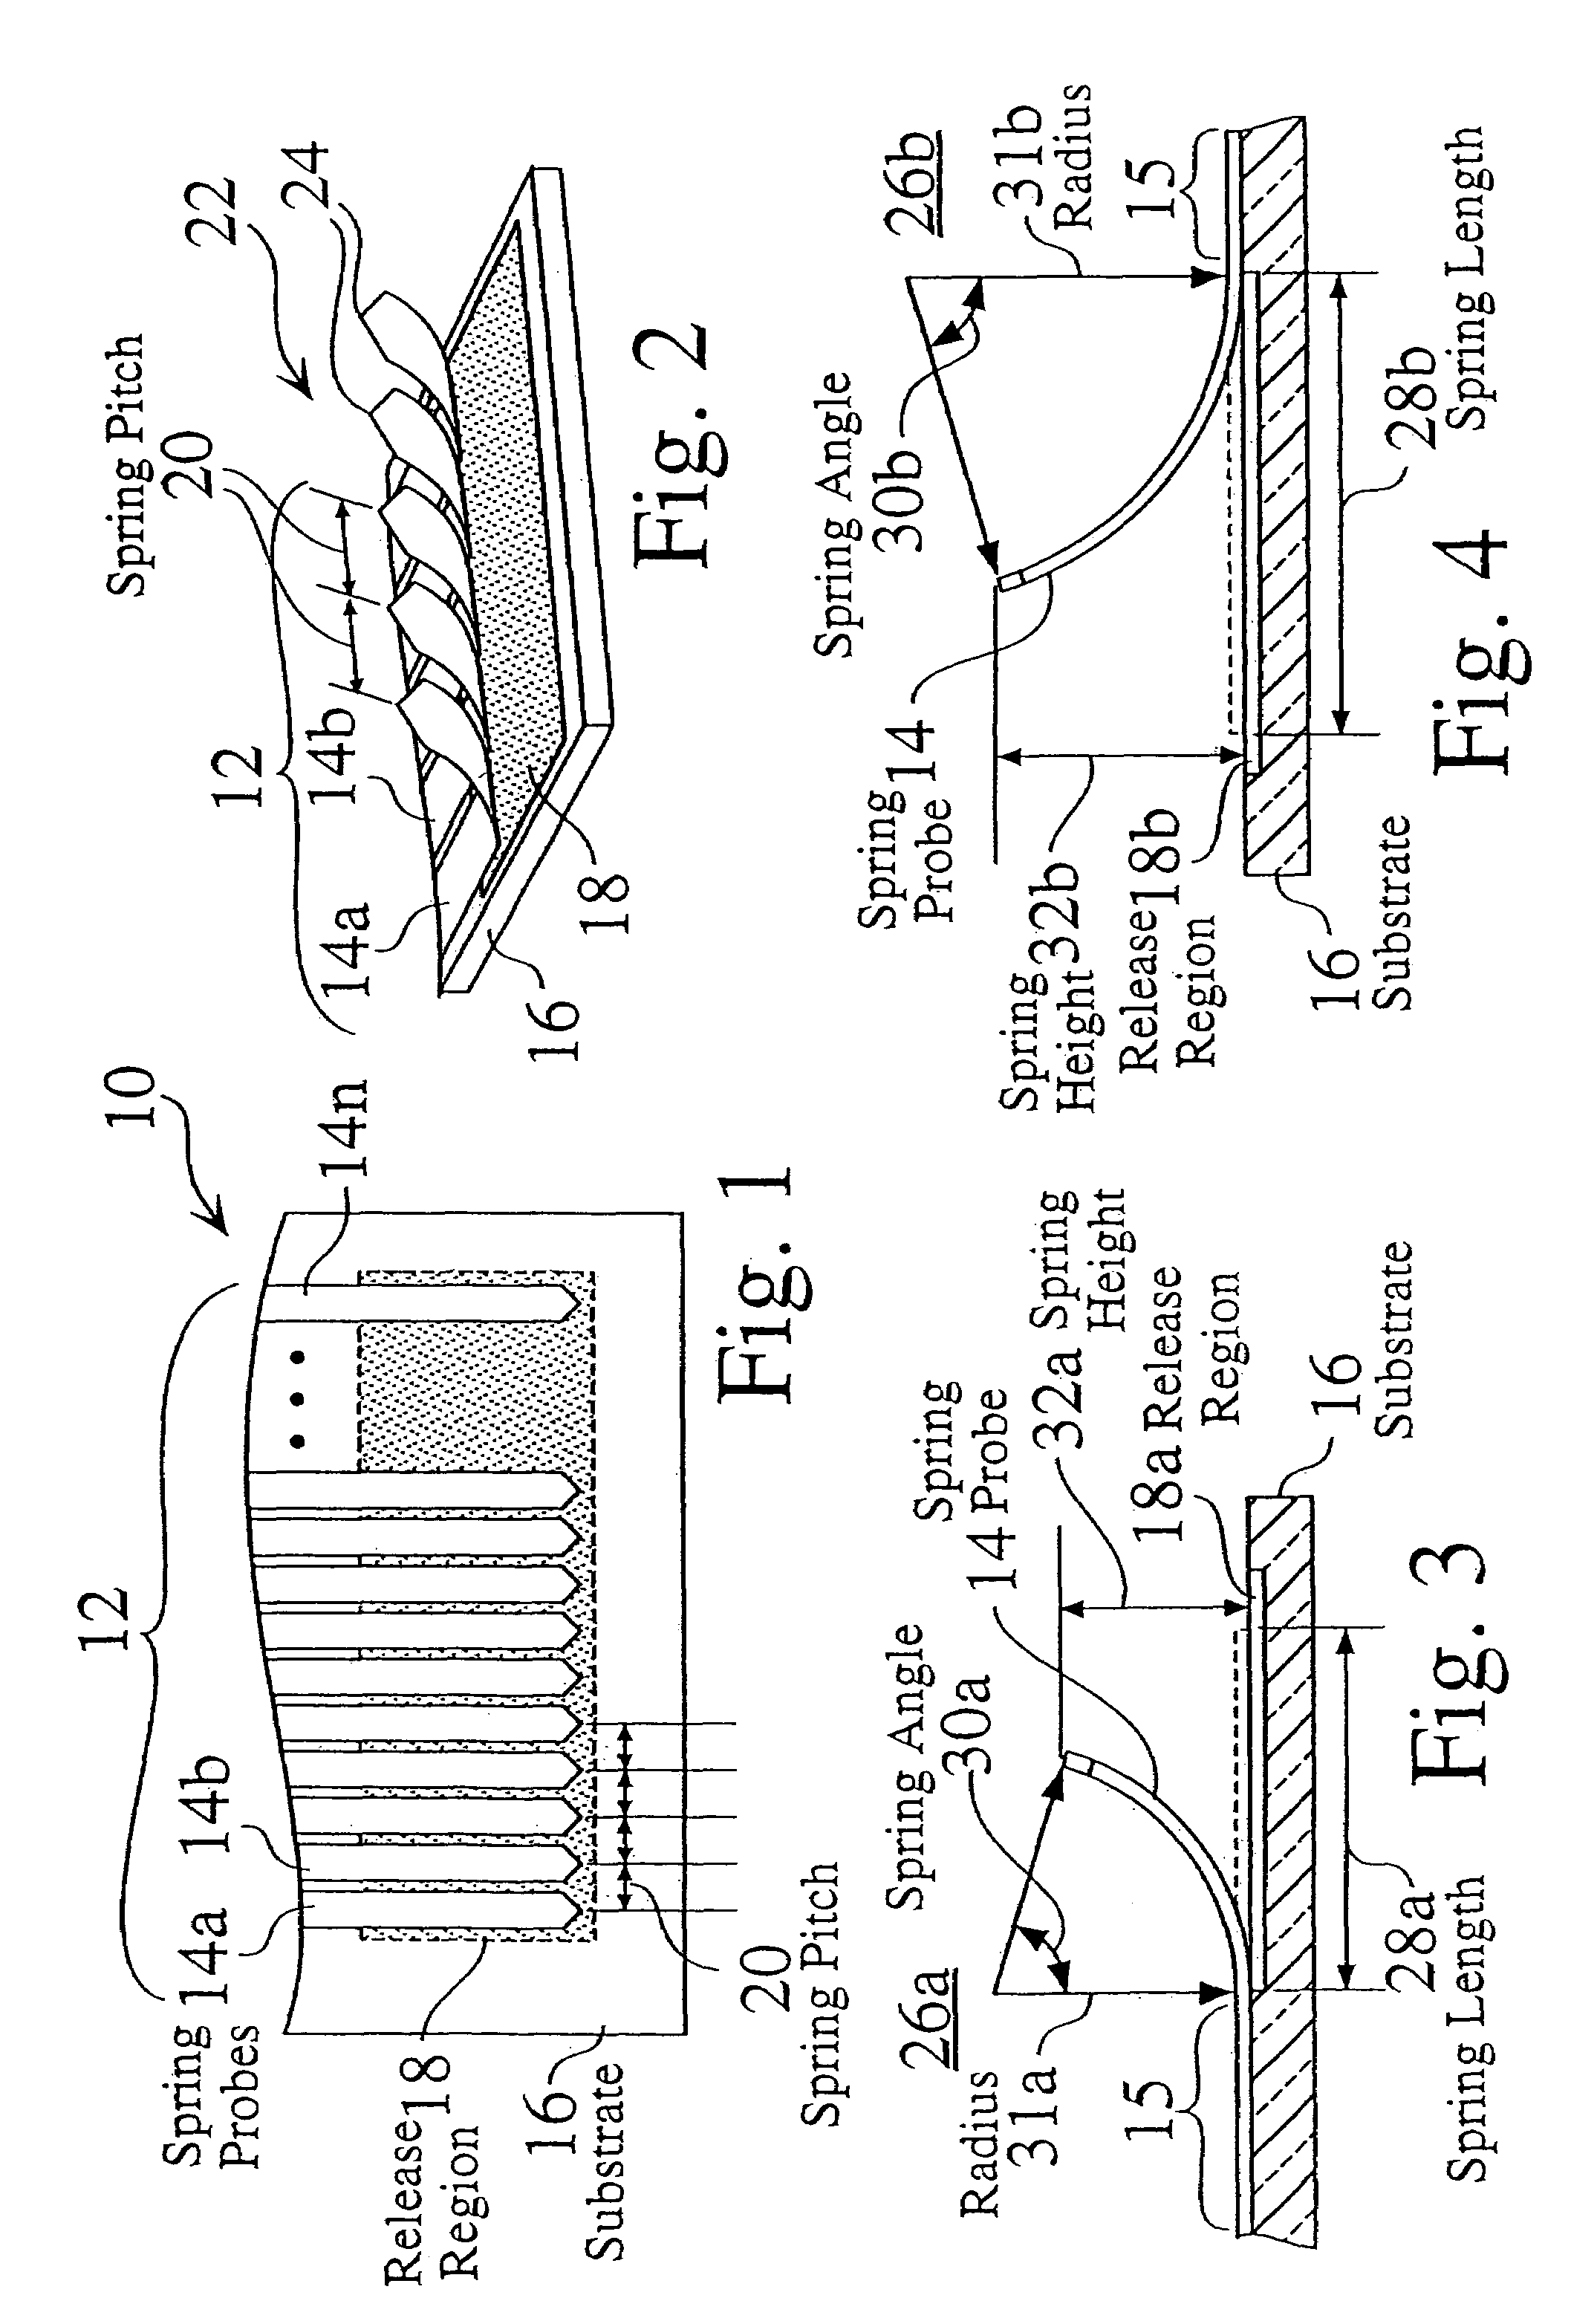 Massively parallel interface for electronic circuit